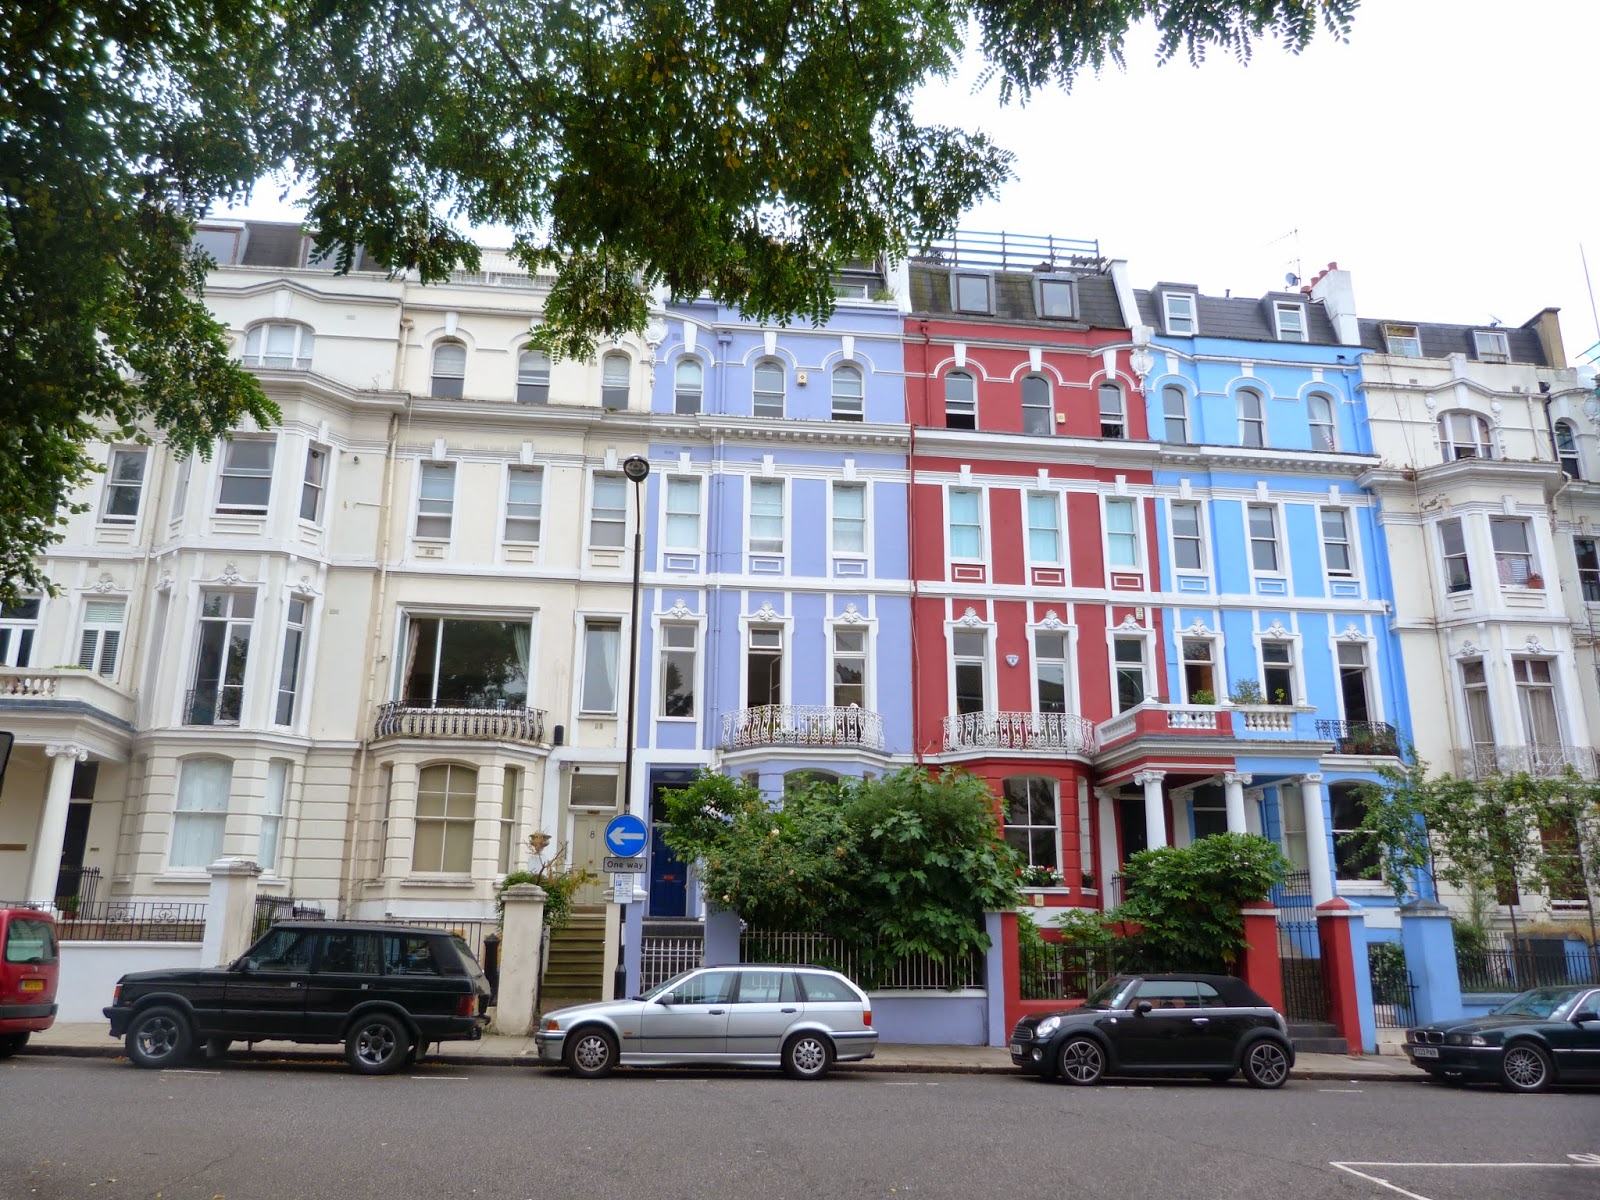 DAILY SCHMANKERL : Colourful Houses in Notting Hill